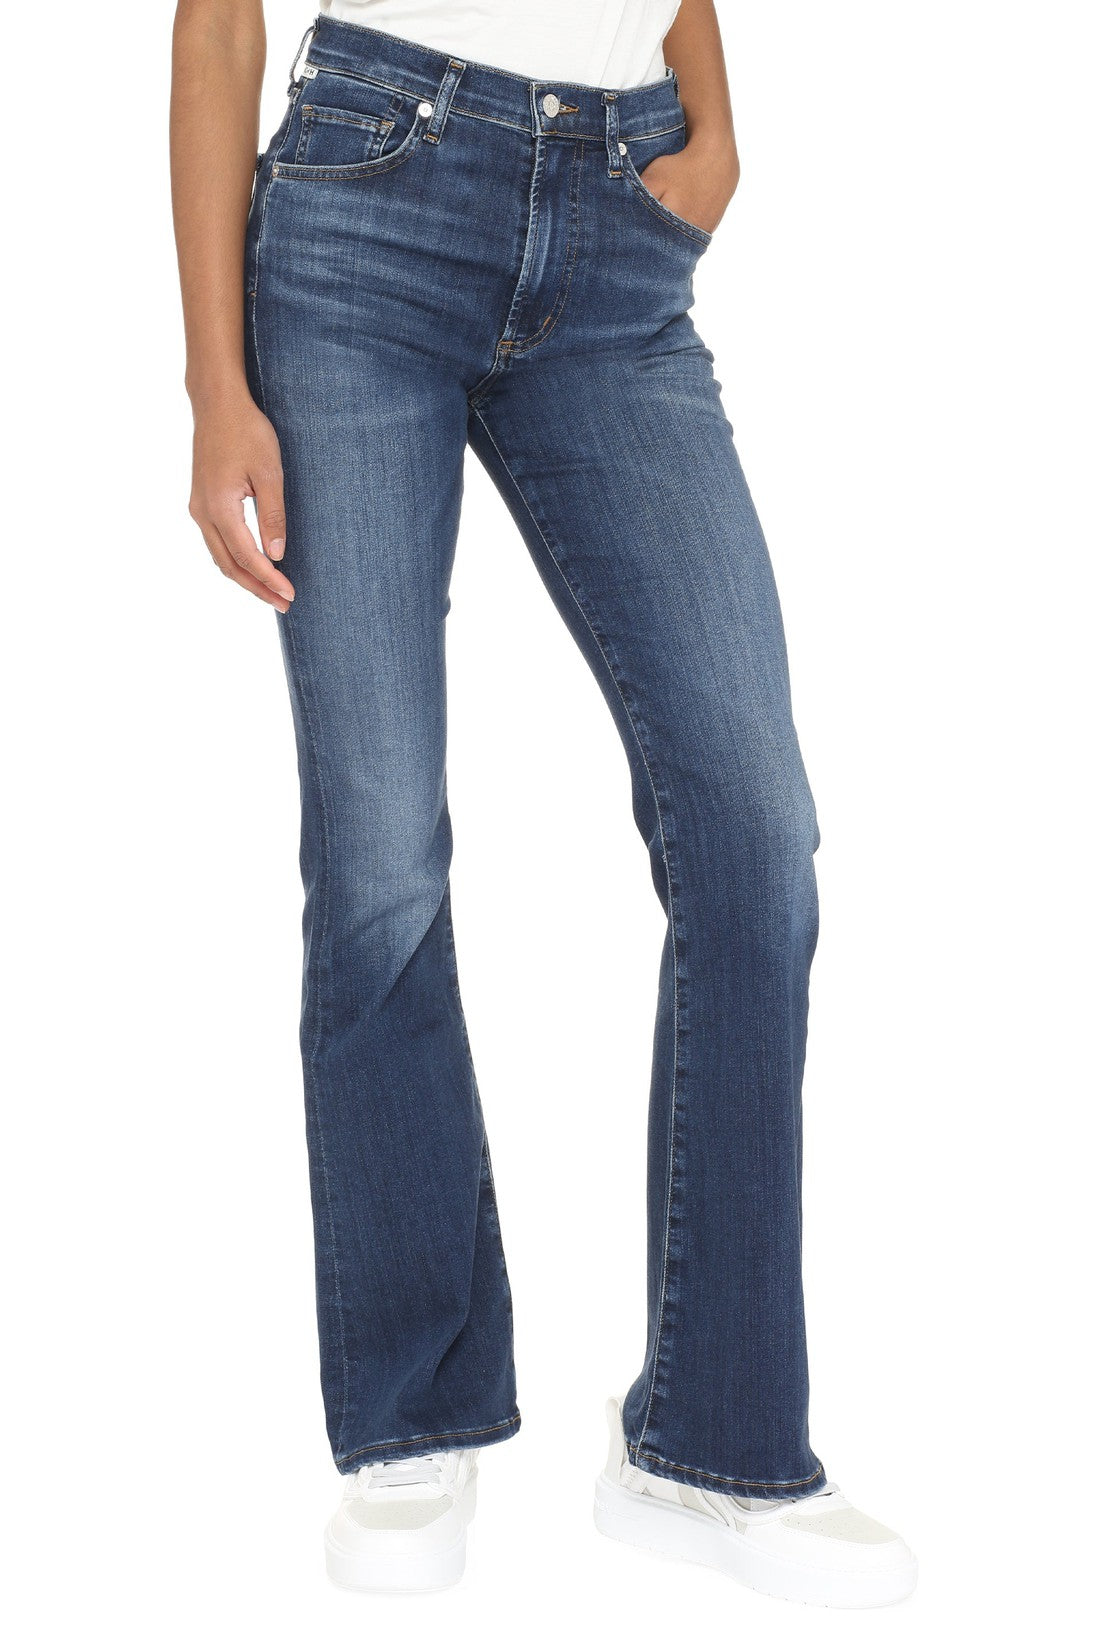 Citizens of Humanity-OUTLET-SALE-Lilah bootcut jeans-ARCHIVIST